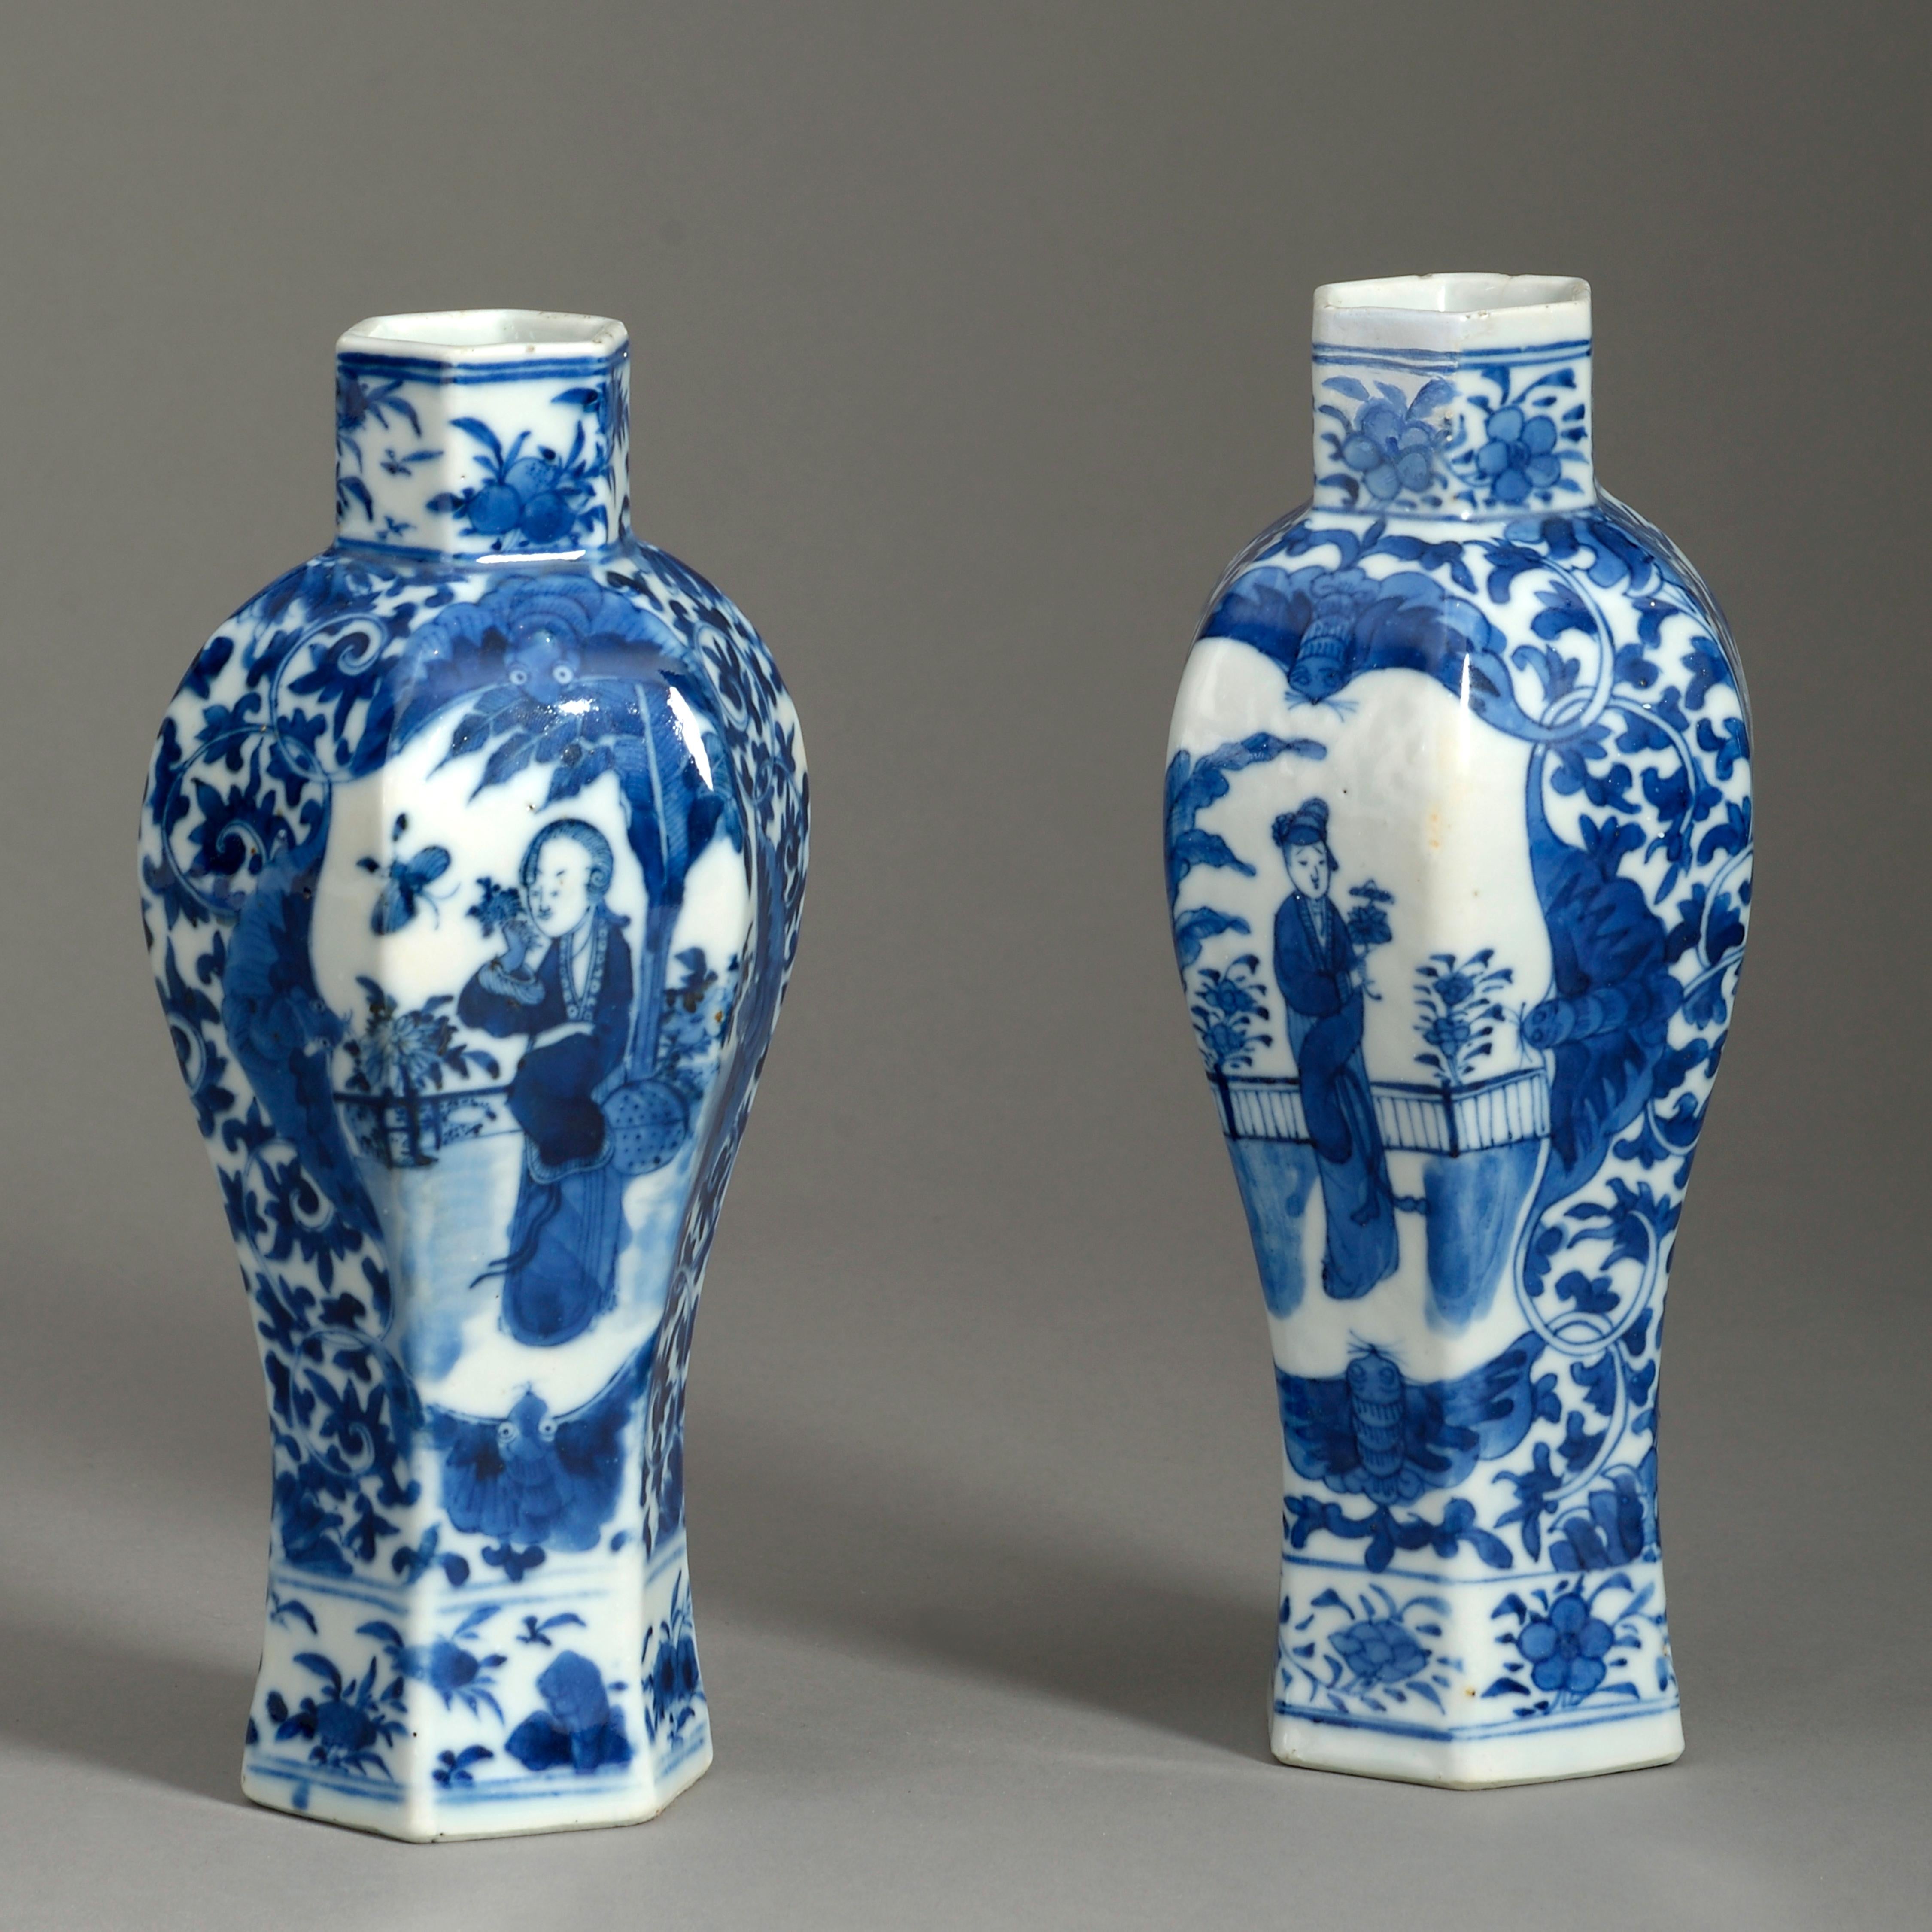 A 19th century pair of small scale blue and white glazed porcelain vases in the Kangxi taste, of hexagonal baluster form and decorated with figurative cartouches upon a foliate ground.

Qing dynasty

One neck restored.

 